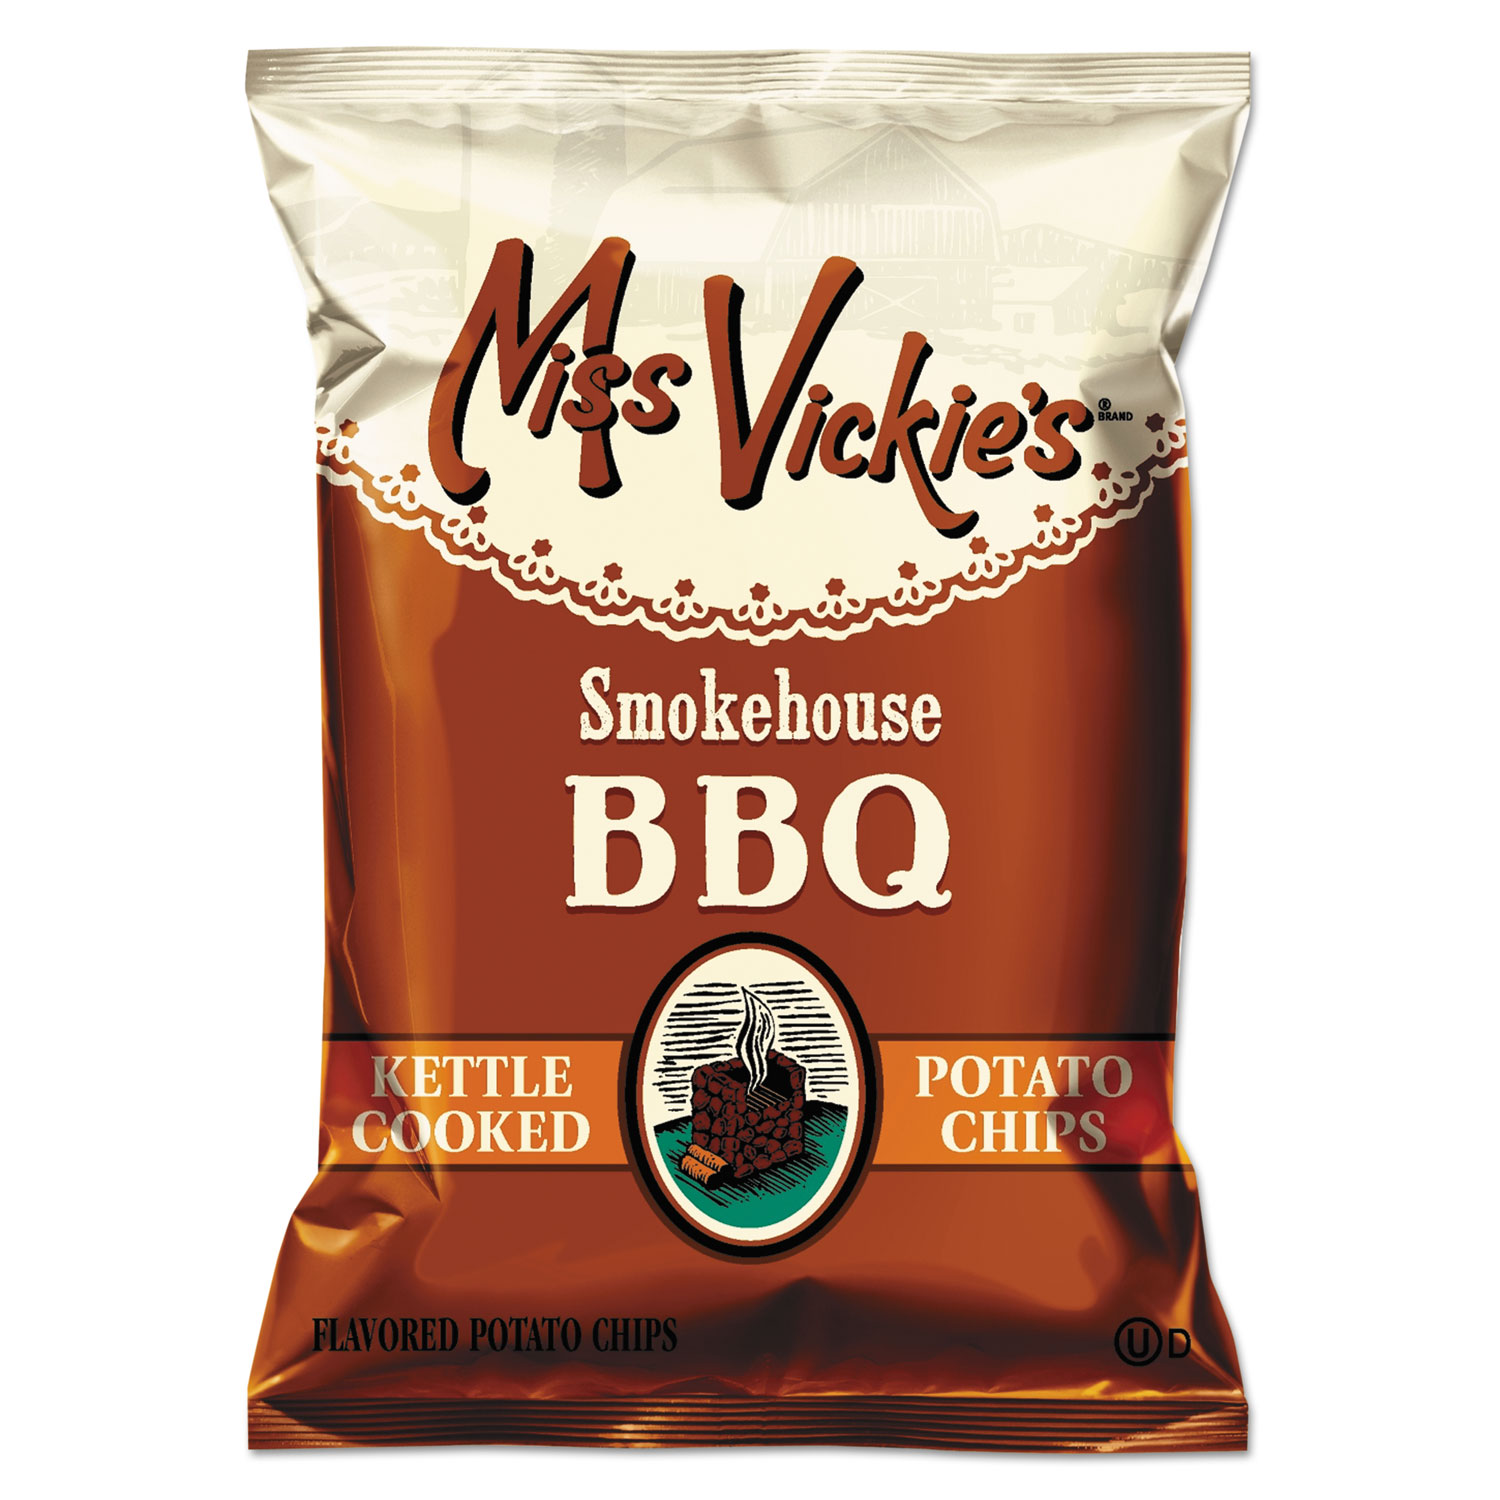  Miss Vickie's 44451 Kettle Cooked Smokehouse BBQ Potato Chips, 1.375 oz Bag, 64/Carton (LAY44451) 